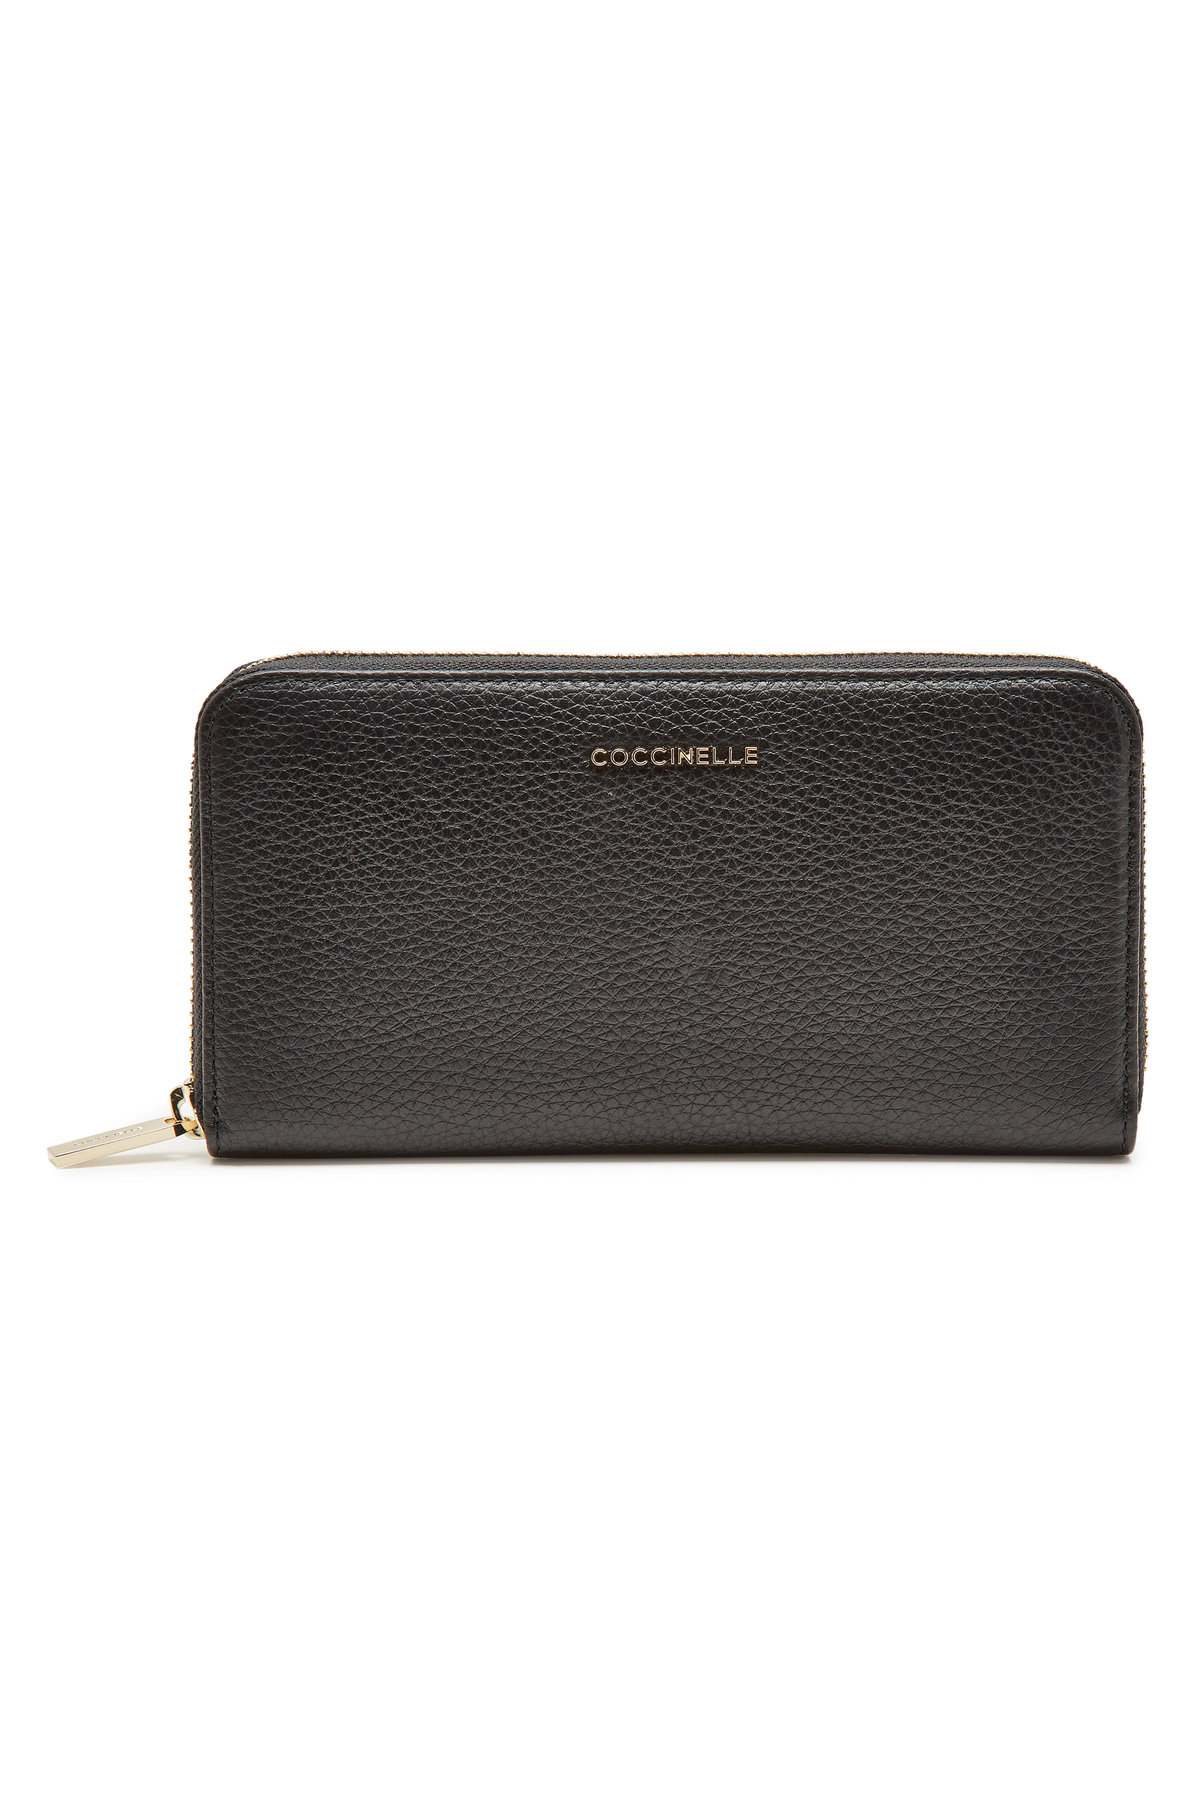 Coccinelle Metallic Soft Leather Wallet In Black | ModeSens